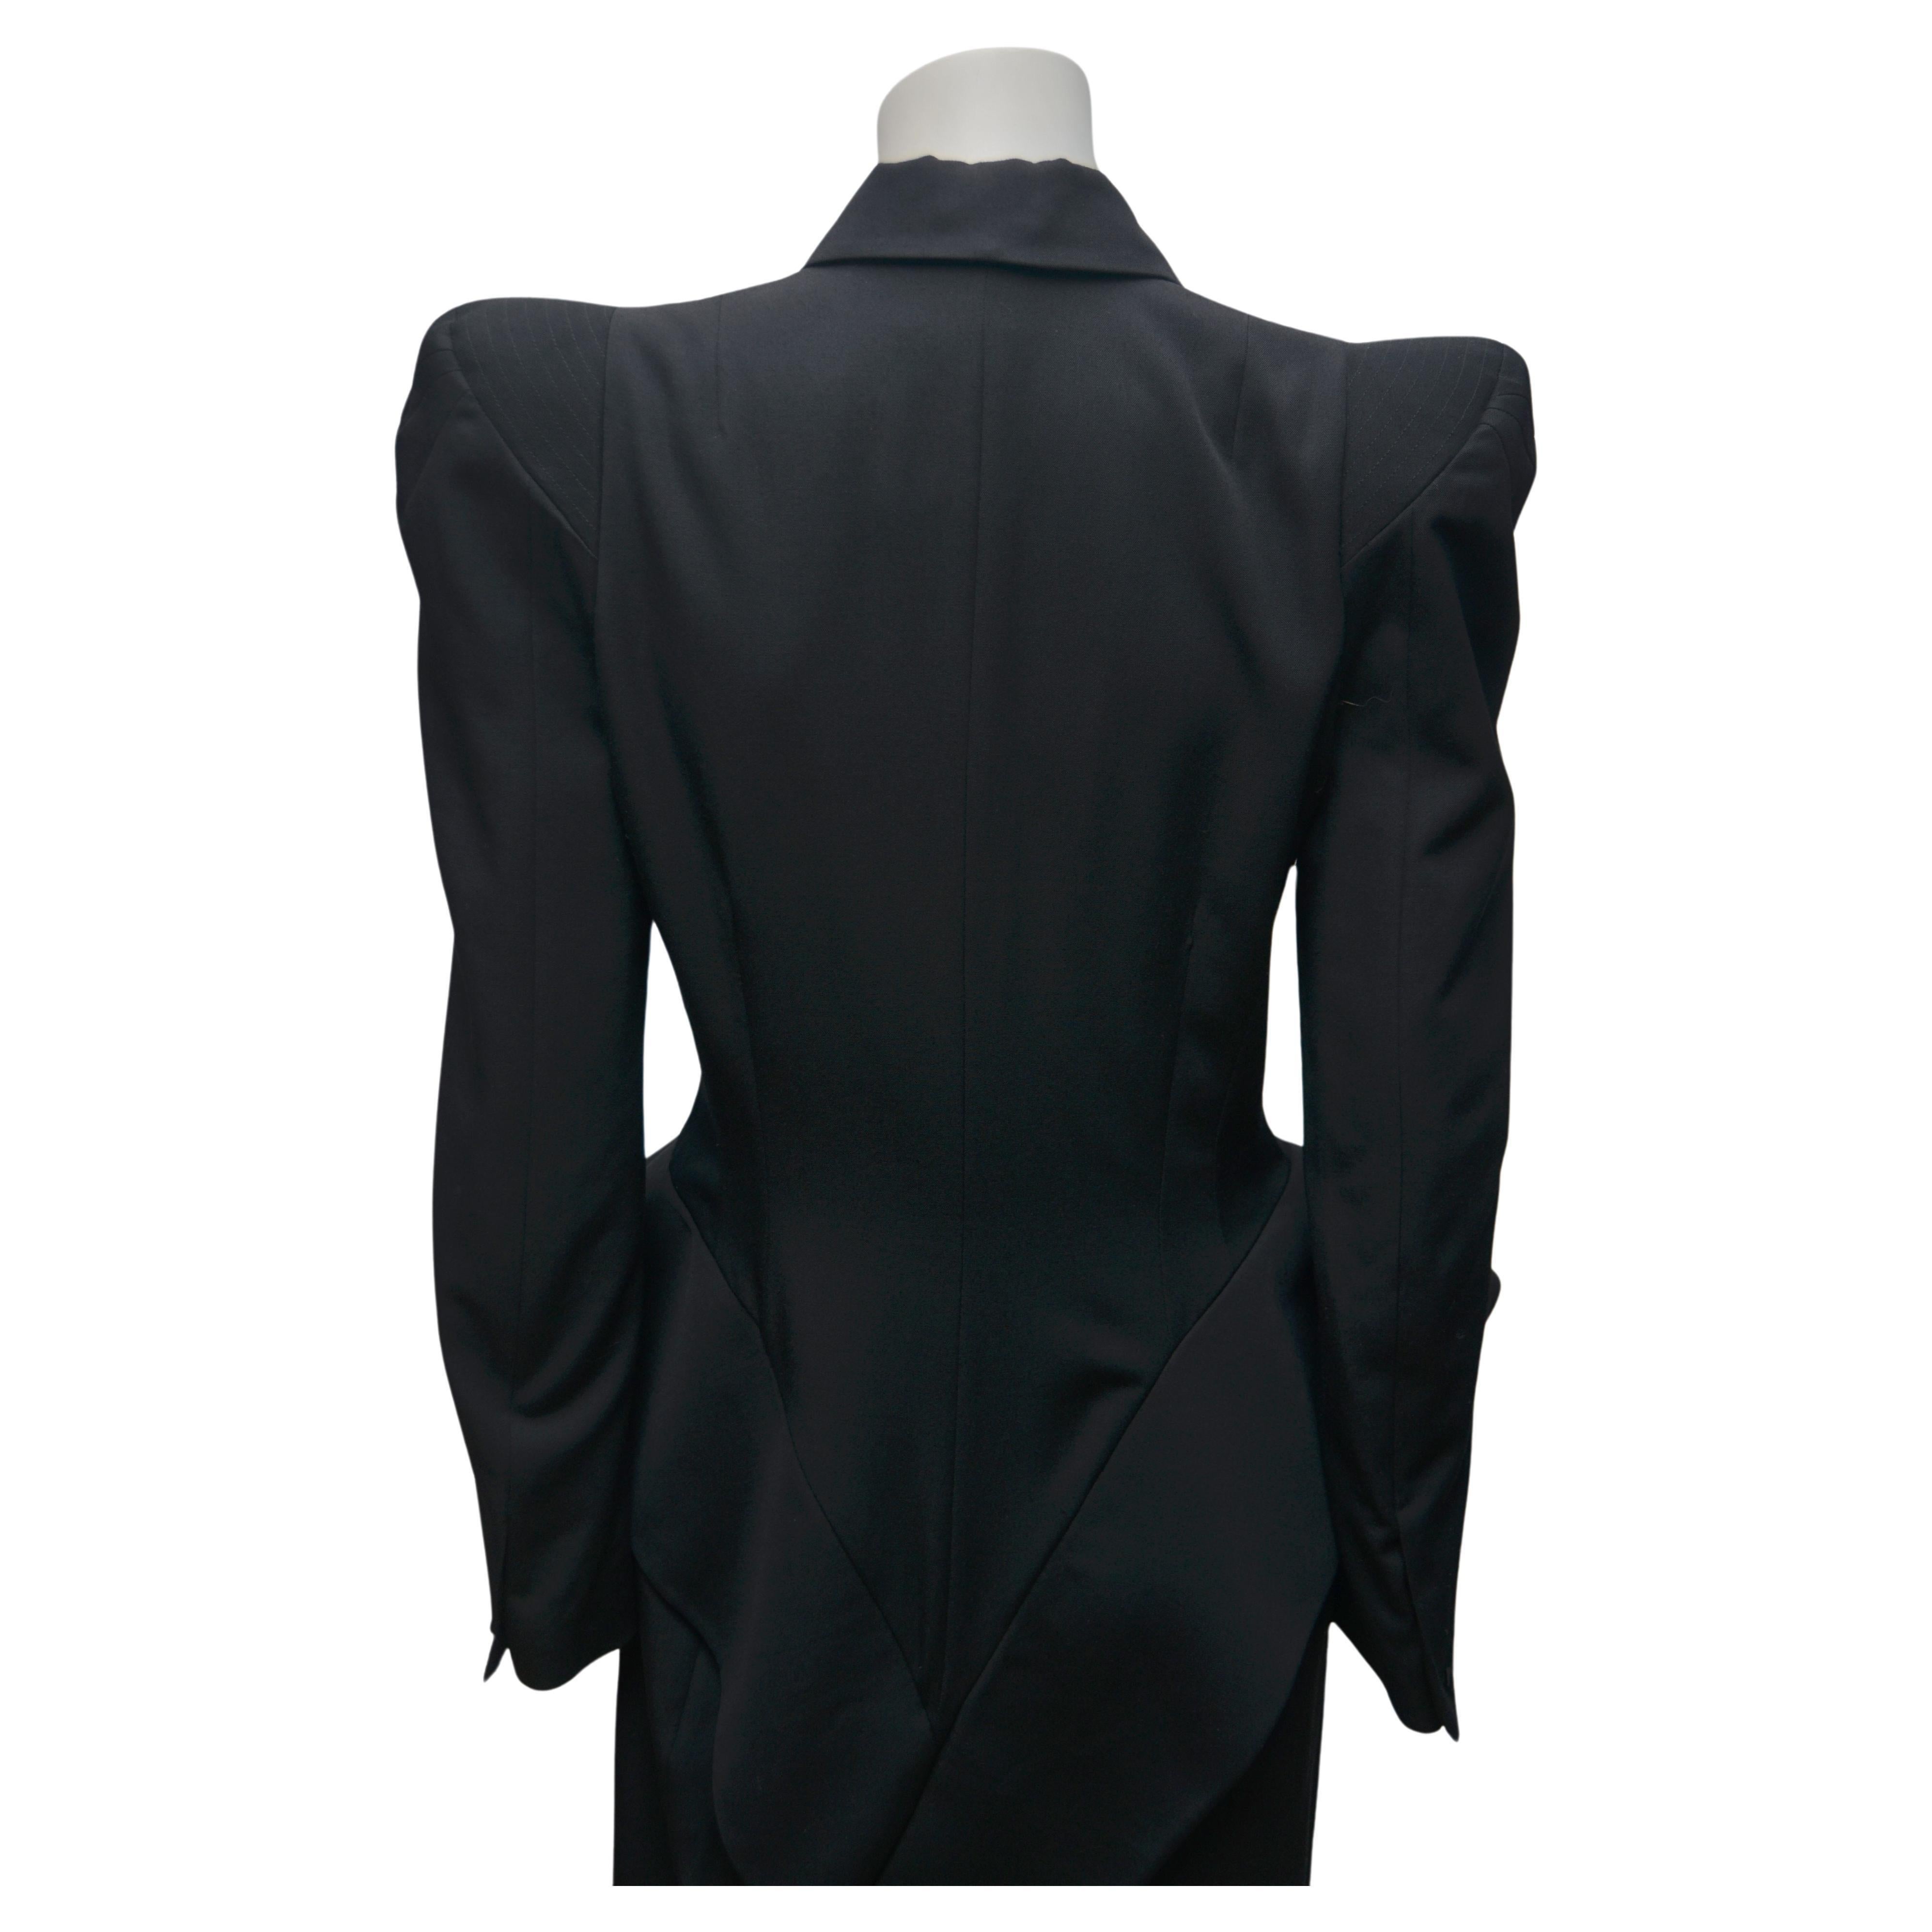 John Galliano Black  Double Breasted  Diva Pin Up Dress Coat  Runway  1995 For Sale 2